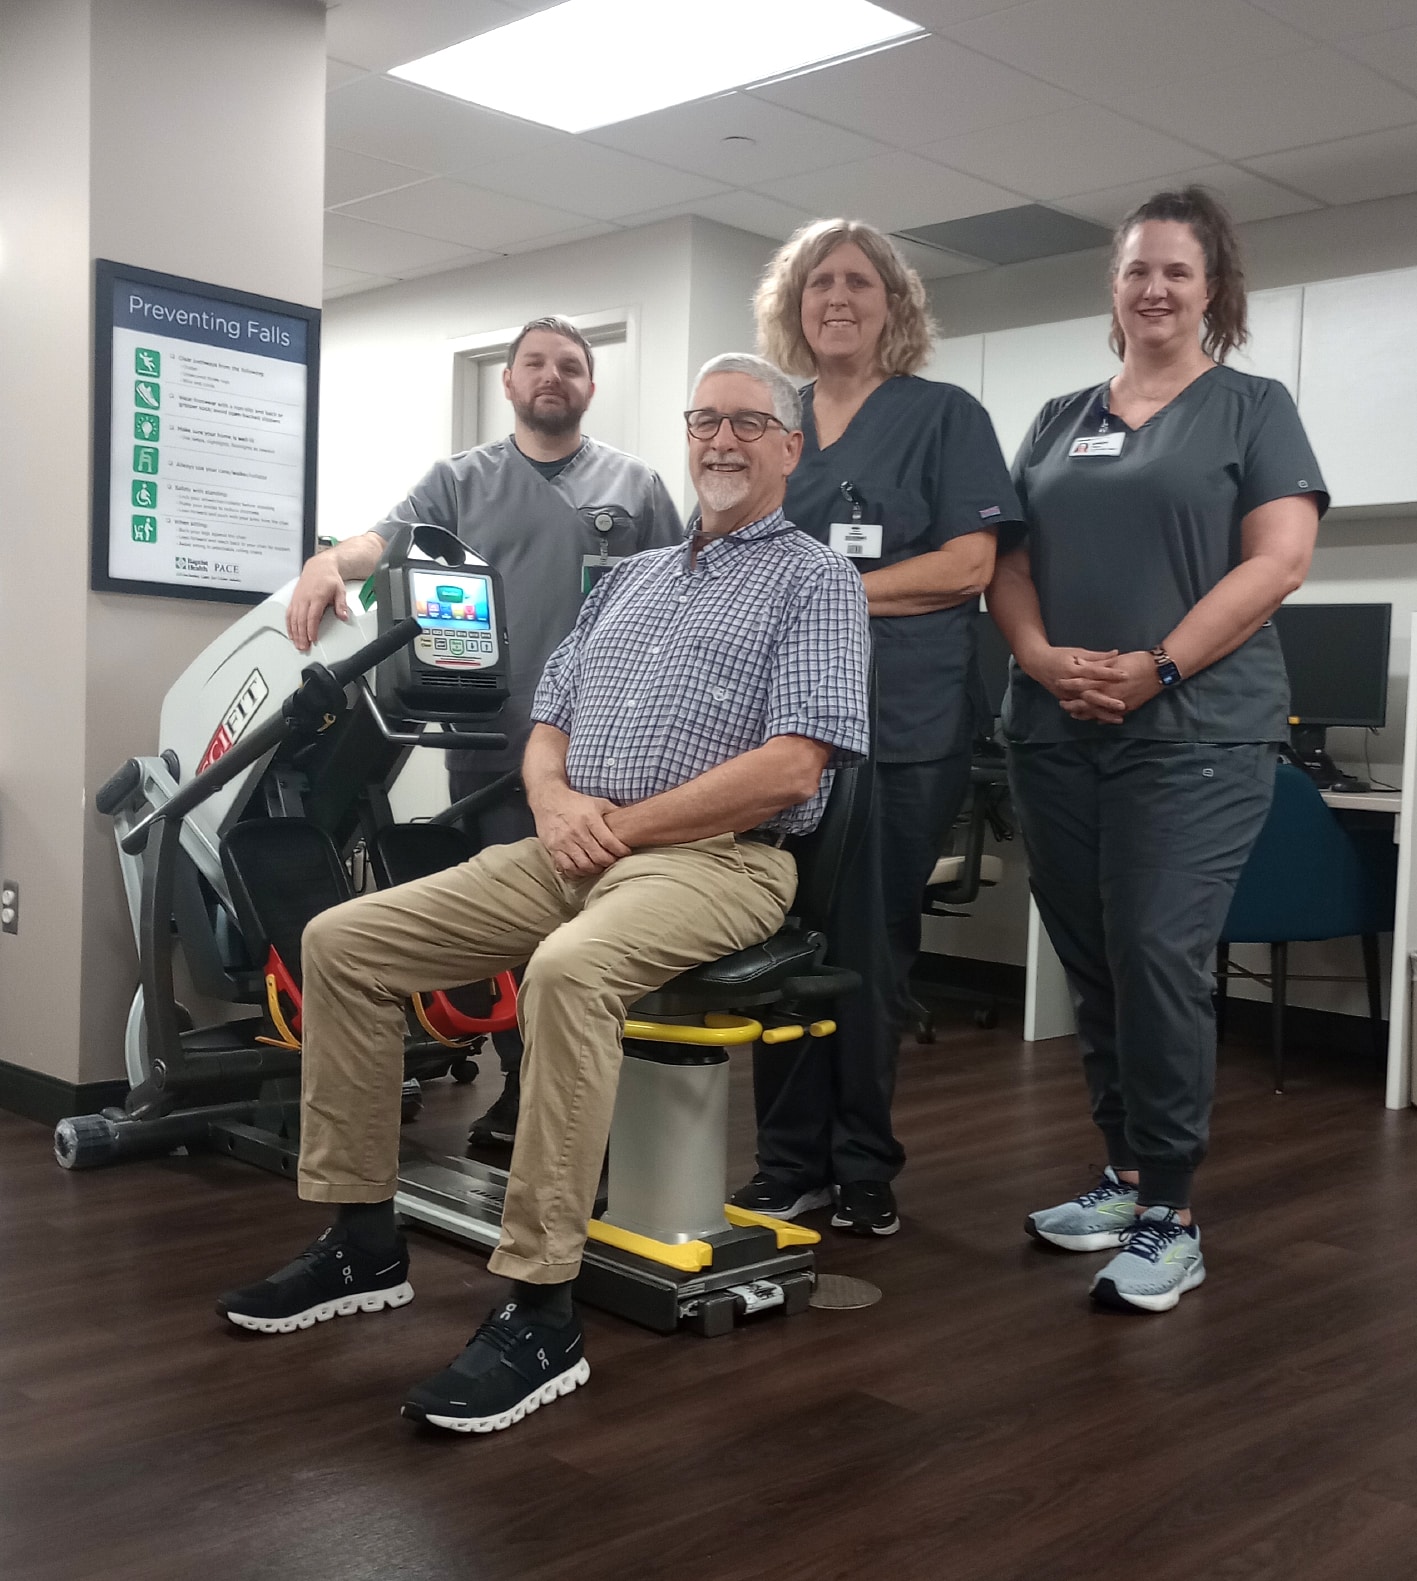 Baptist Health PACE has a therapy team, on-site at the Adult Day Health Center, consisting of two occupational therapists and two physical therapists.